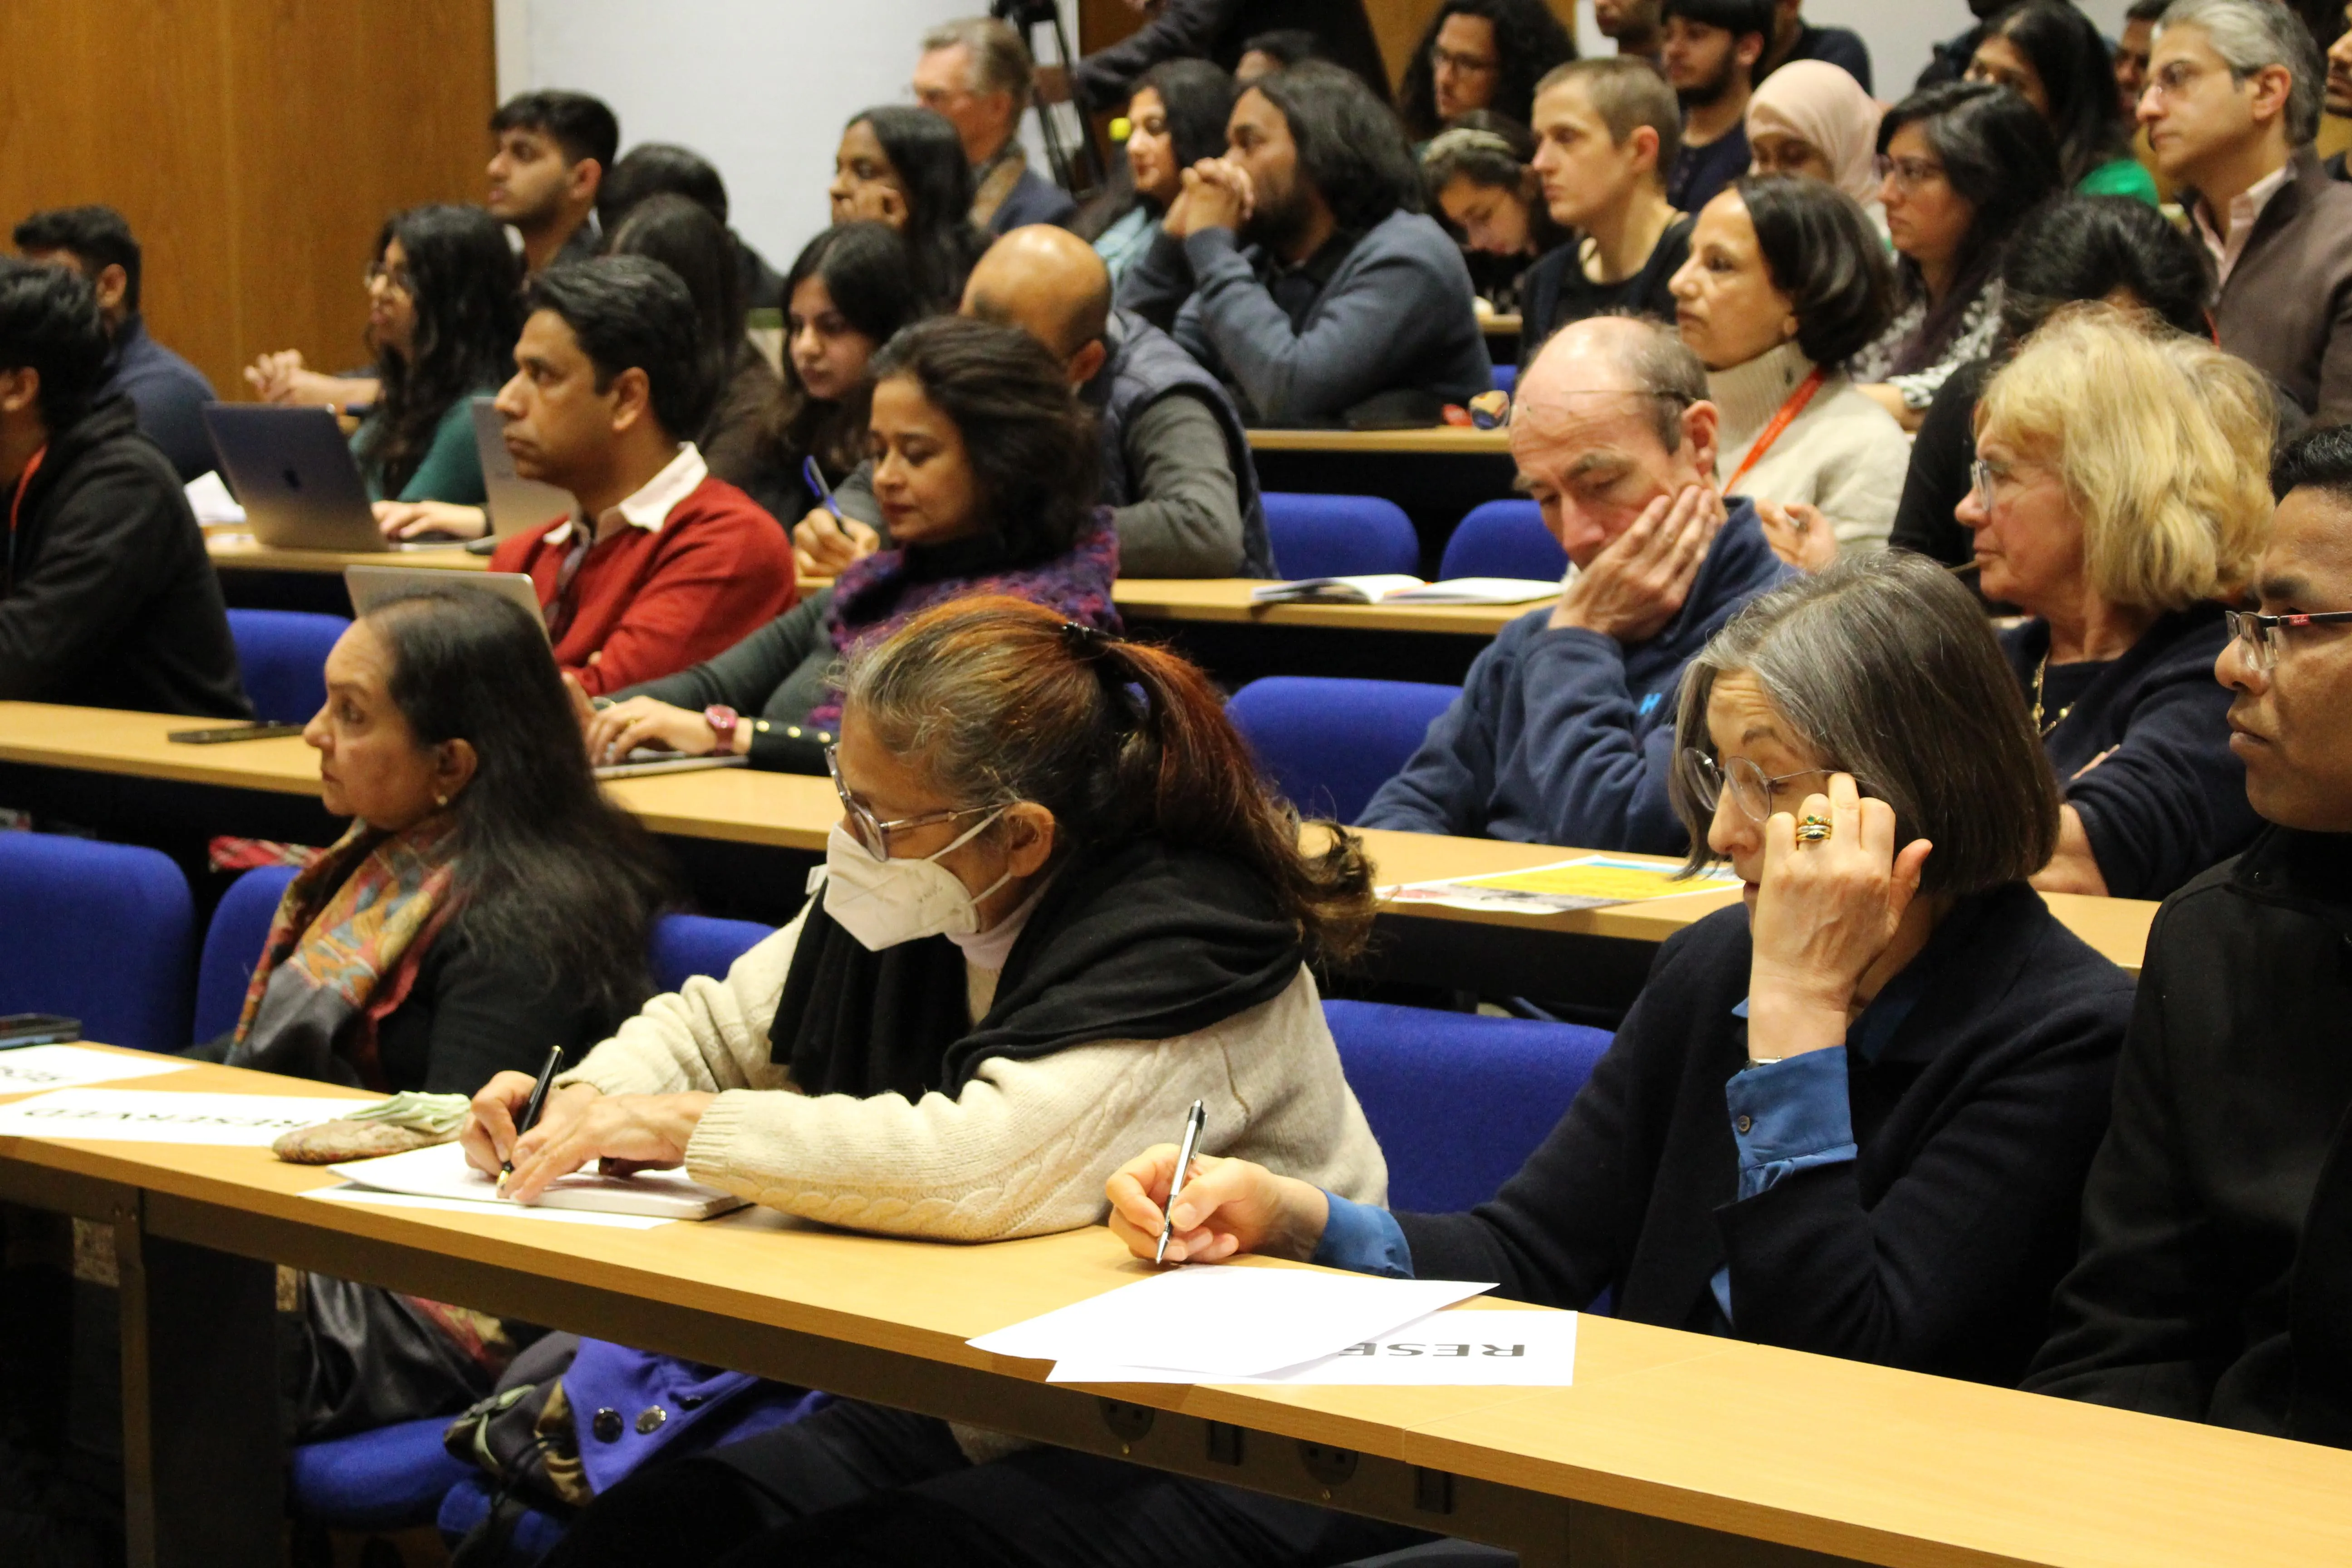 Audience members taking notes at the Nehru Memorial lecture 2023 by Prof Madhavan K Palat